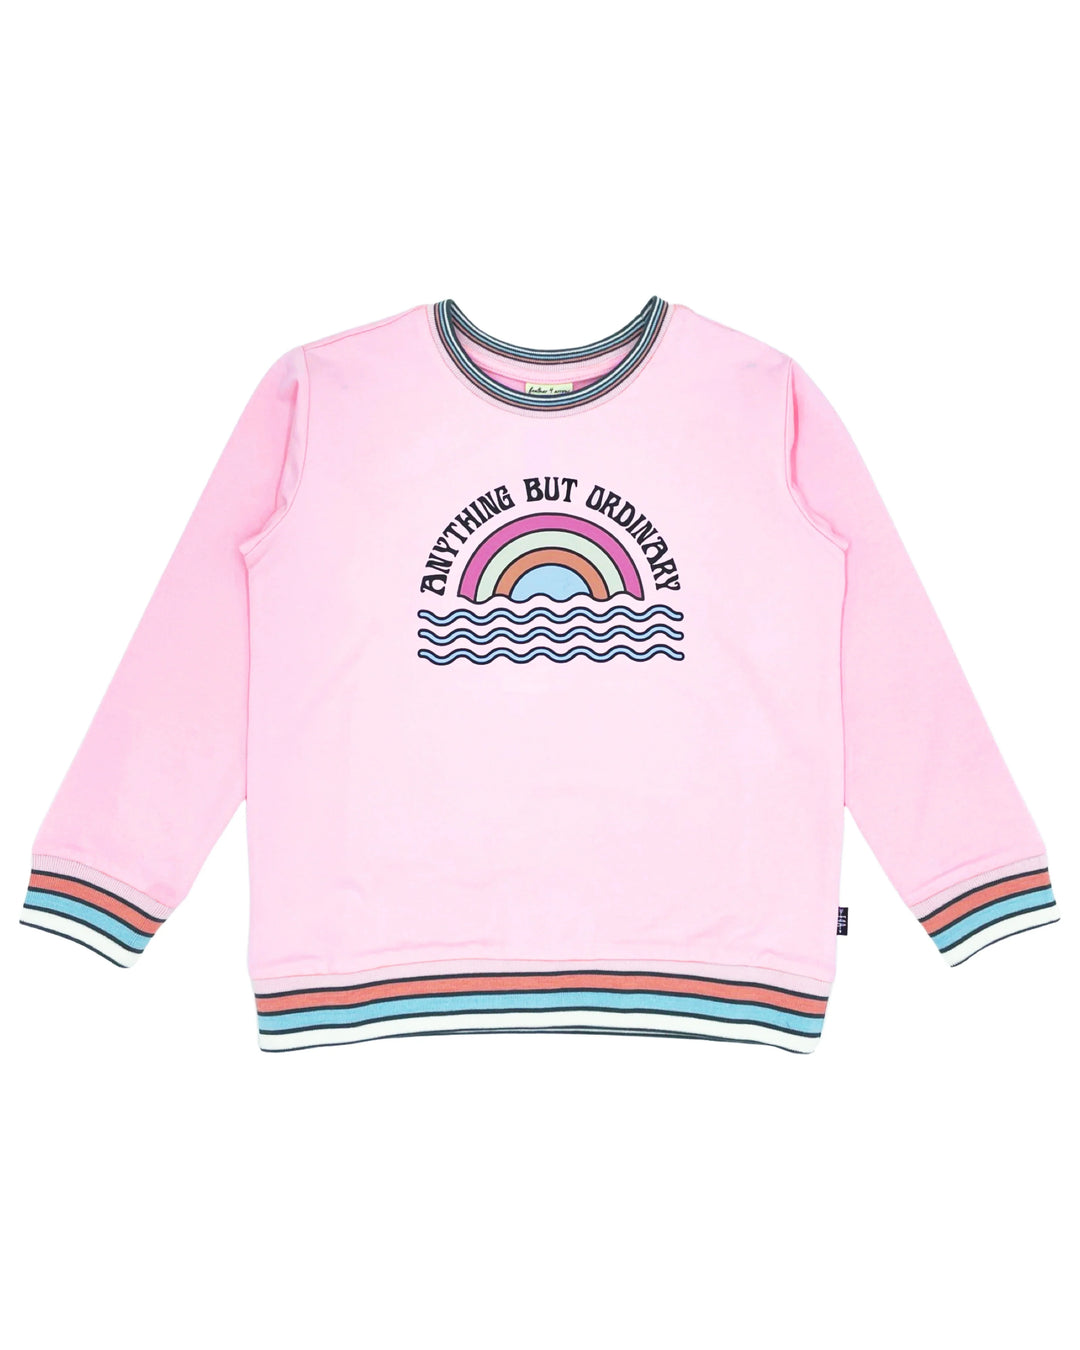 The Girls Anything But Ordinary Pullover